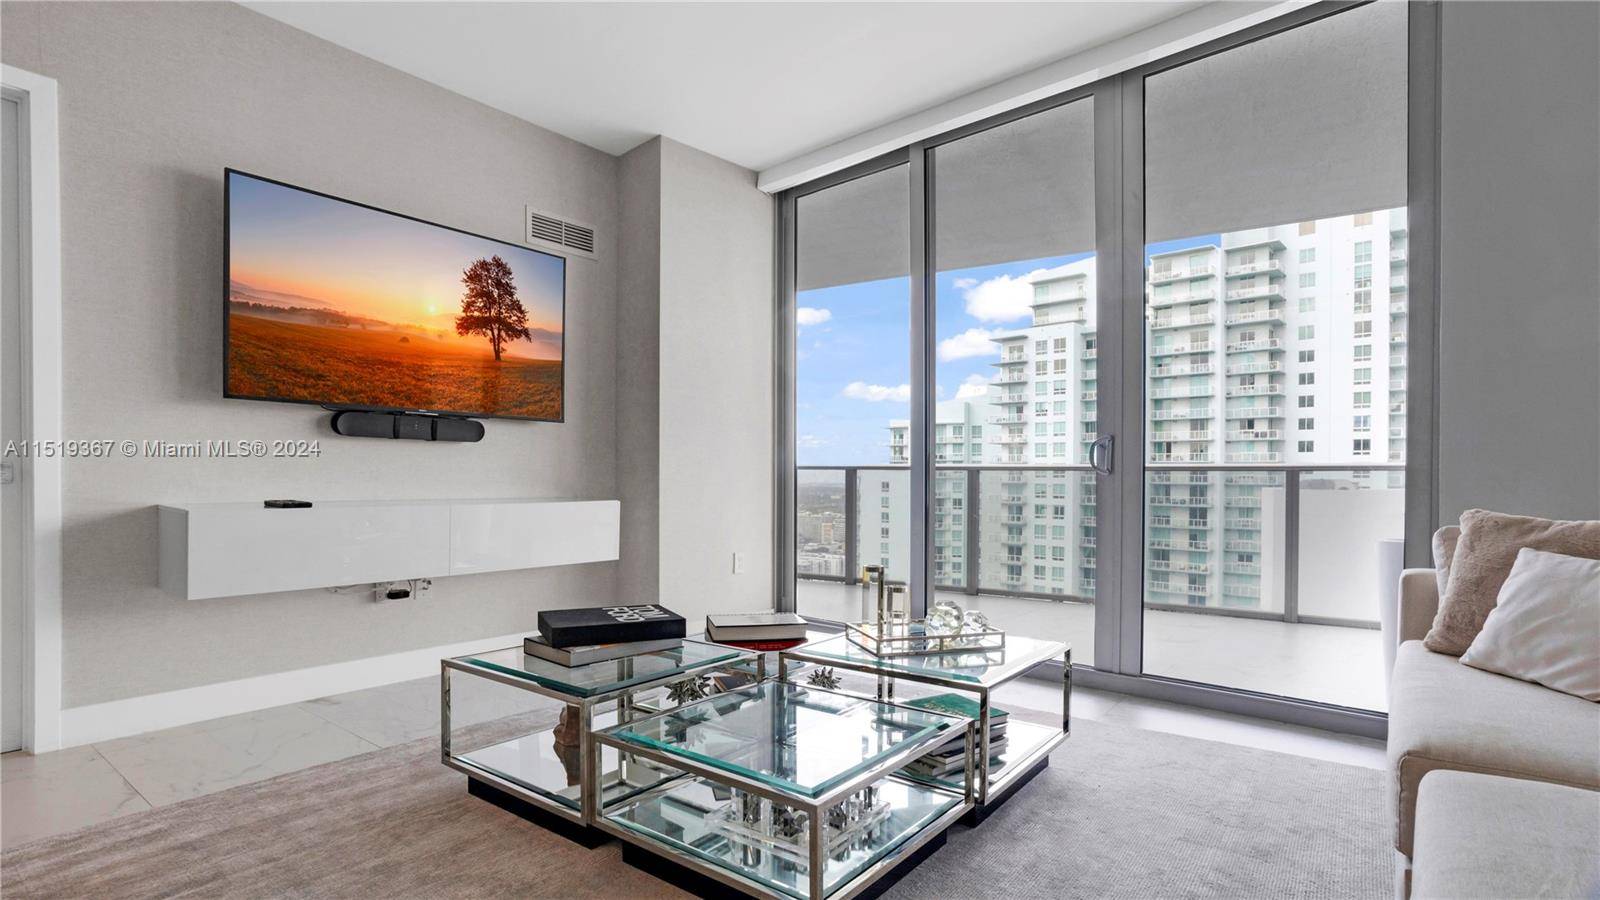 Stunning luxury apartment for rent !